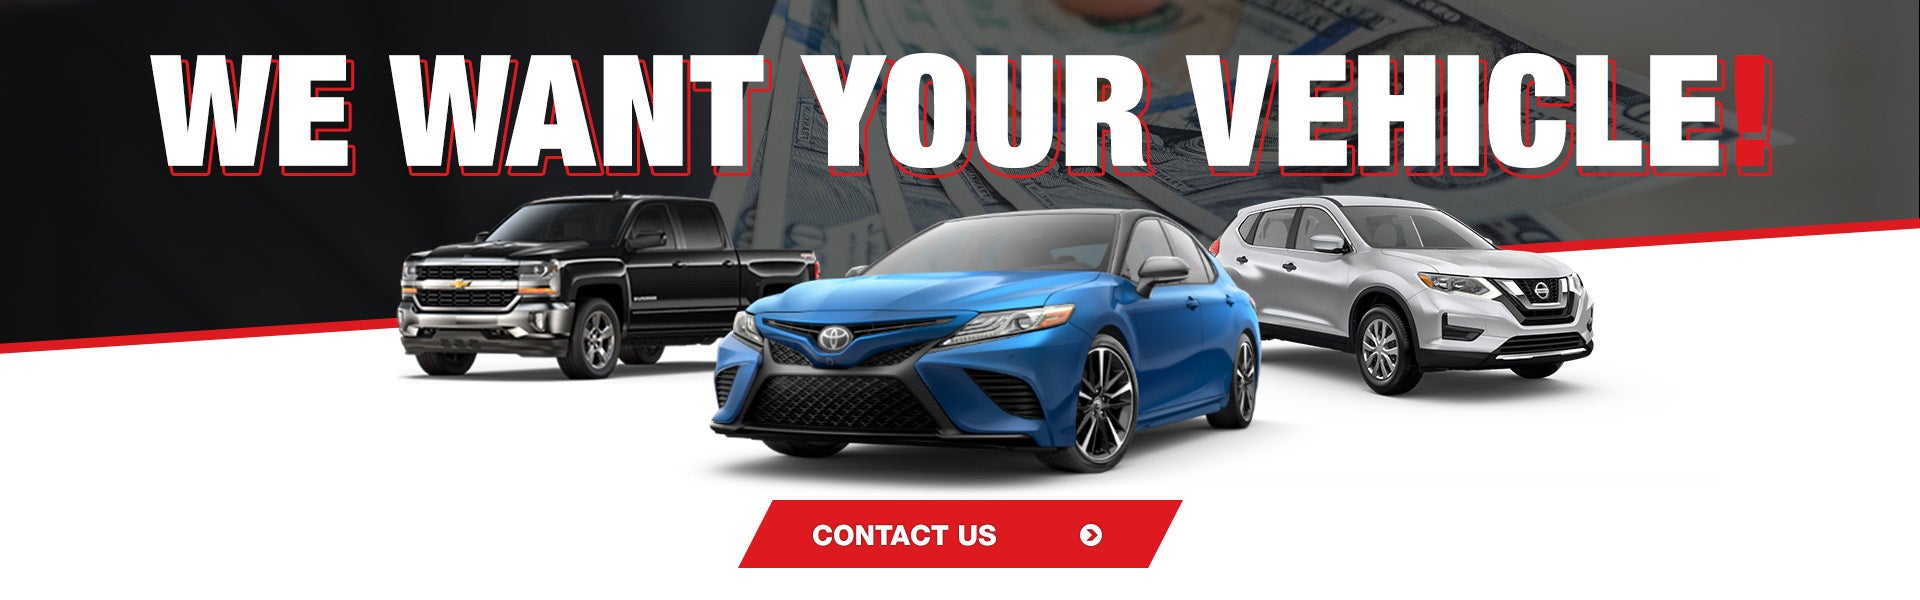 We Want Your Vehicle 